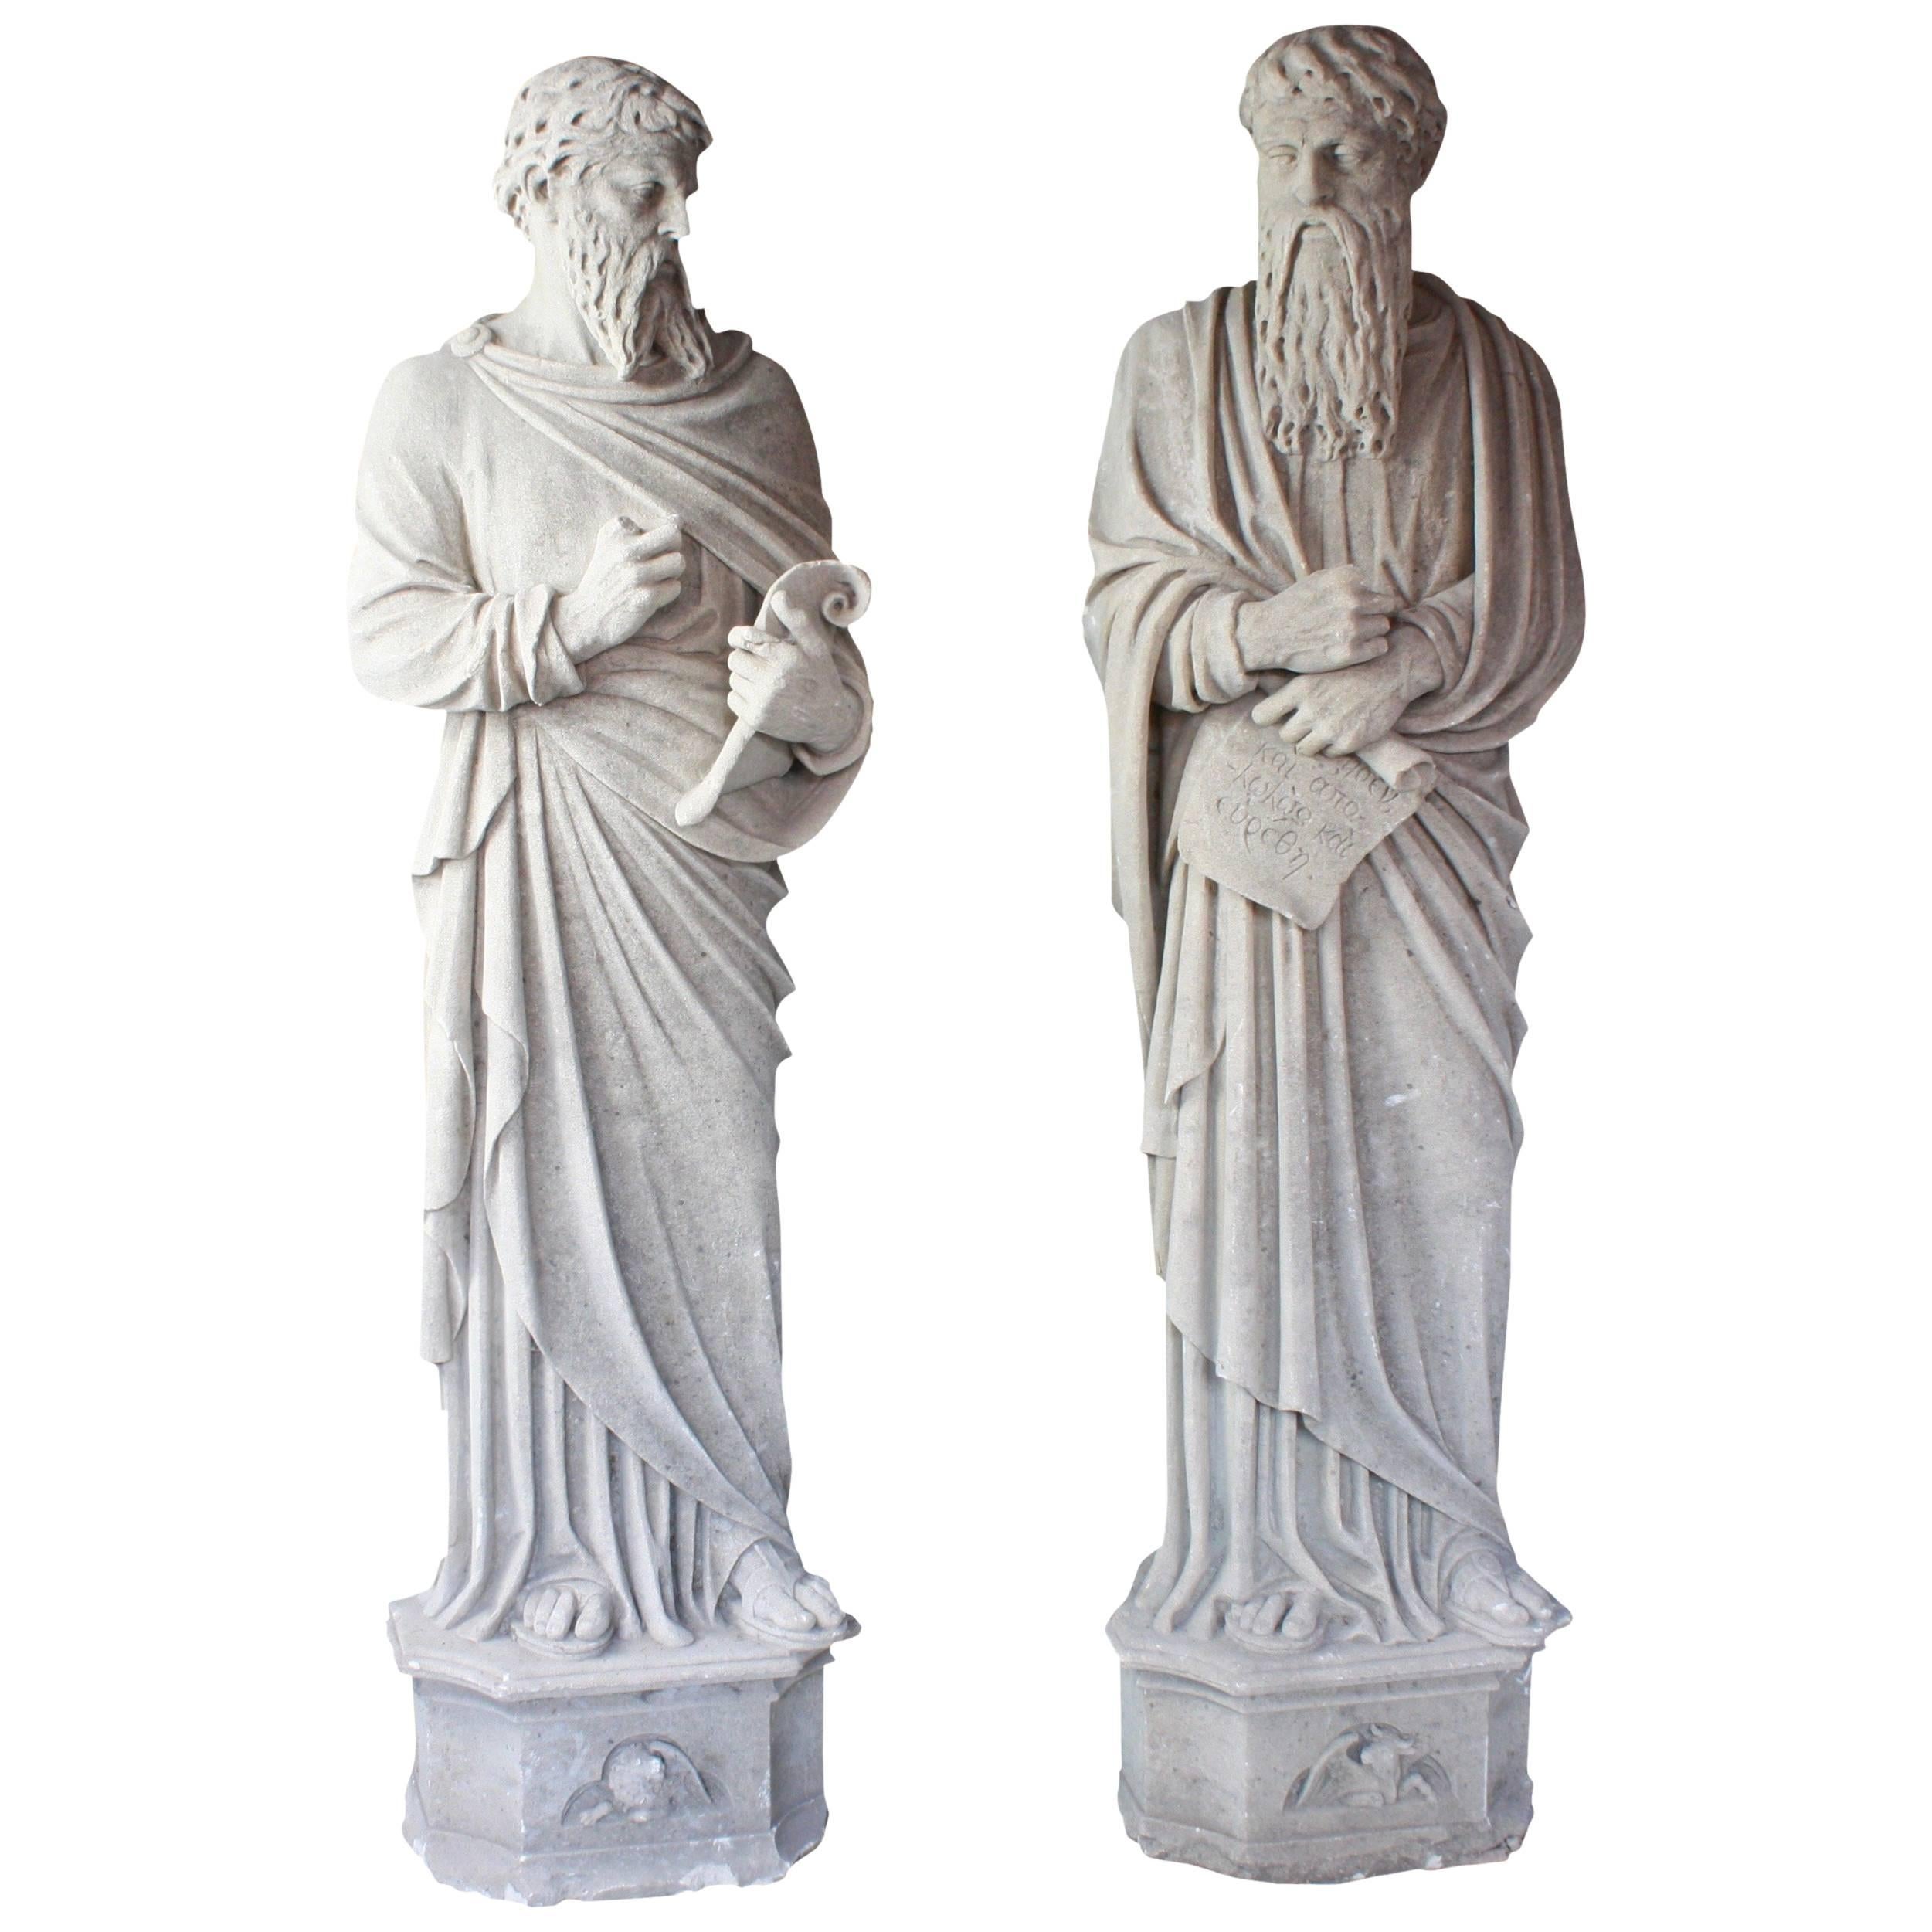 Monumental Pair of Early 19th Century Stone Statues of Saints